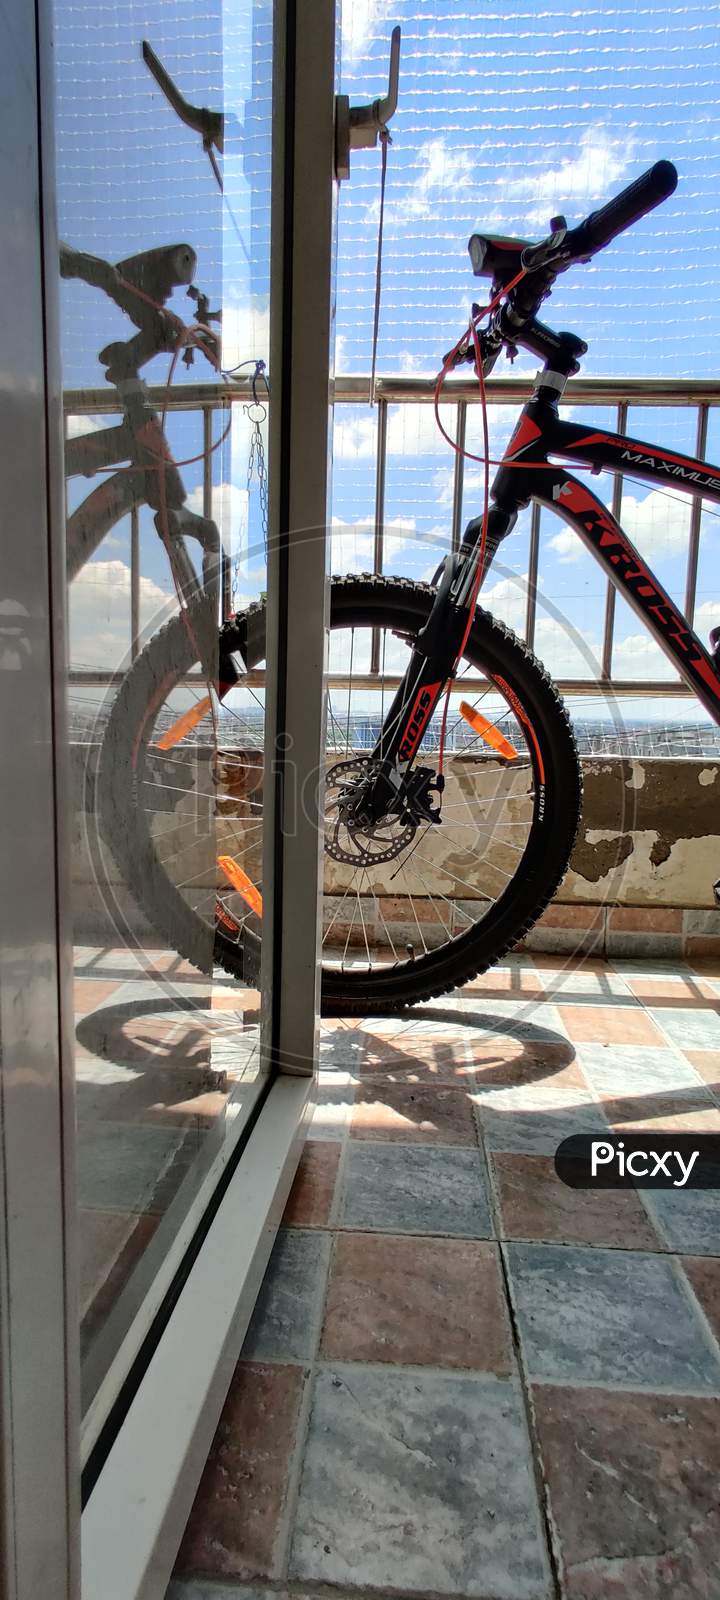 That's my Bicycle, parked on the 11th Floor Balcony